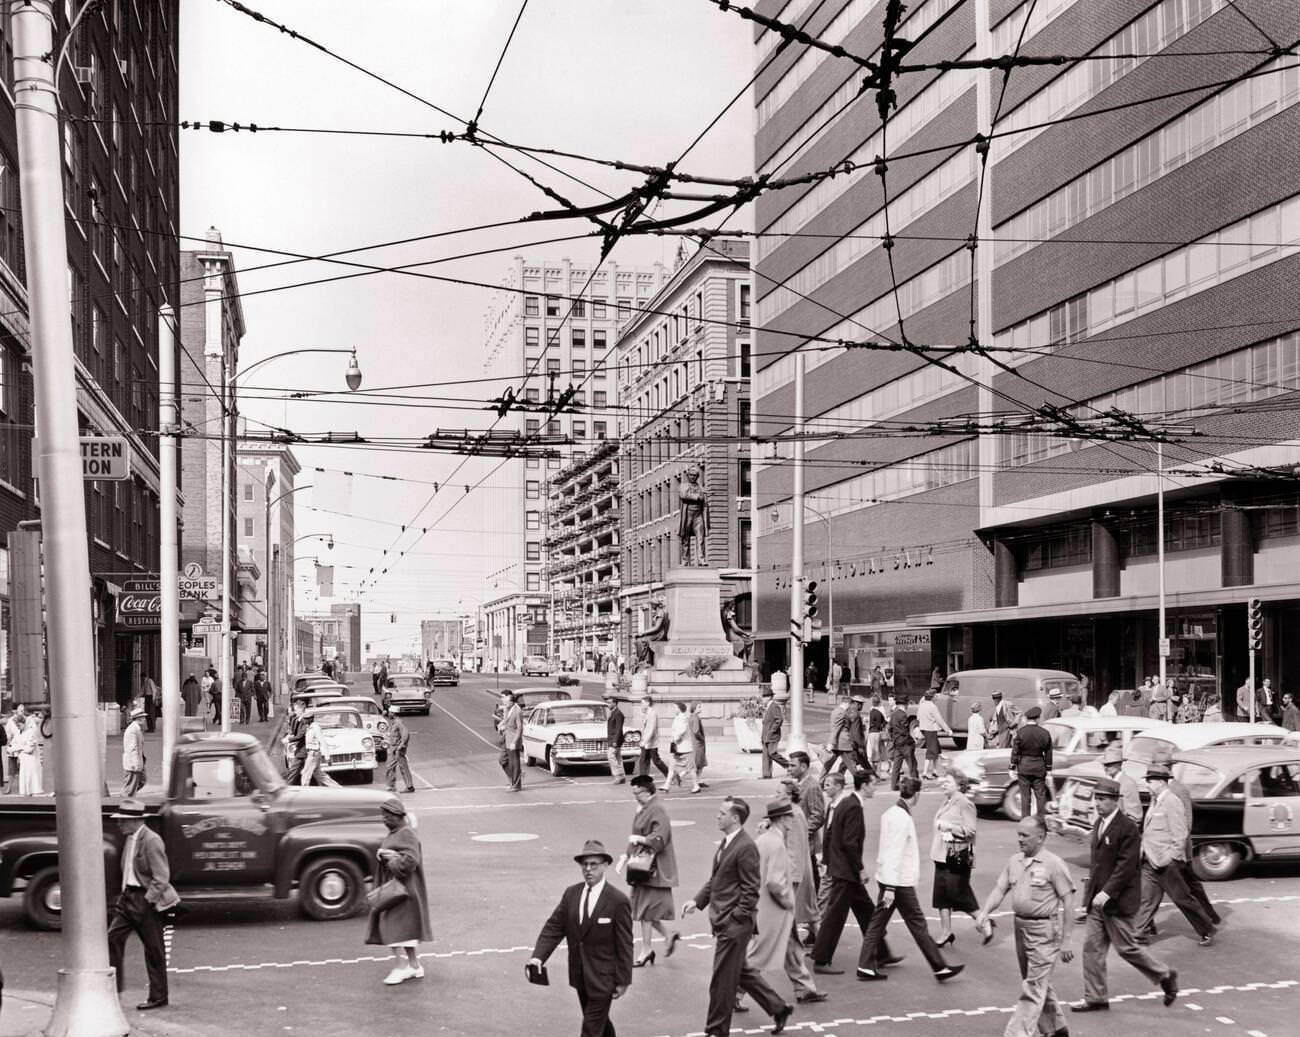 Cityscape Marietta and Forsythia Streets, overhead wires powering trackless trolley electric bus system, Atlanta, 1960s